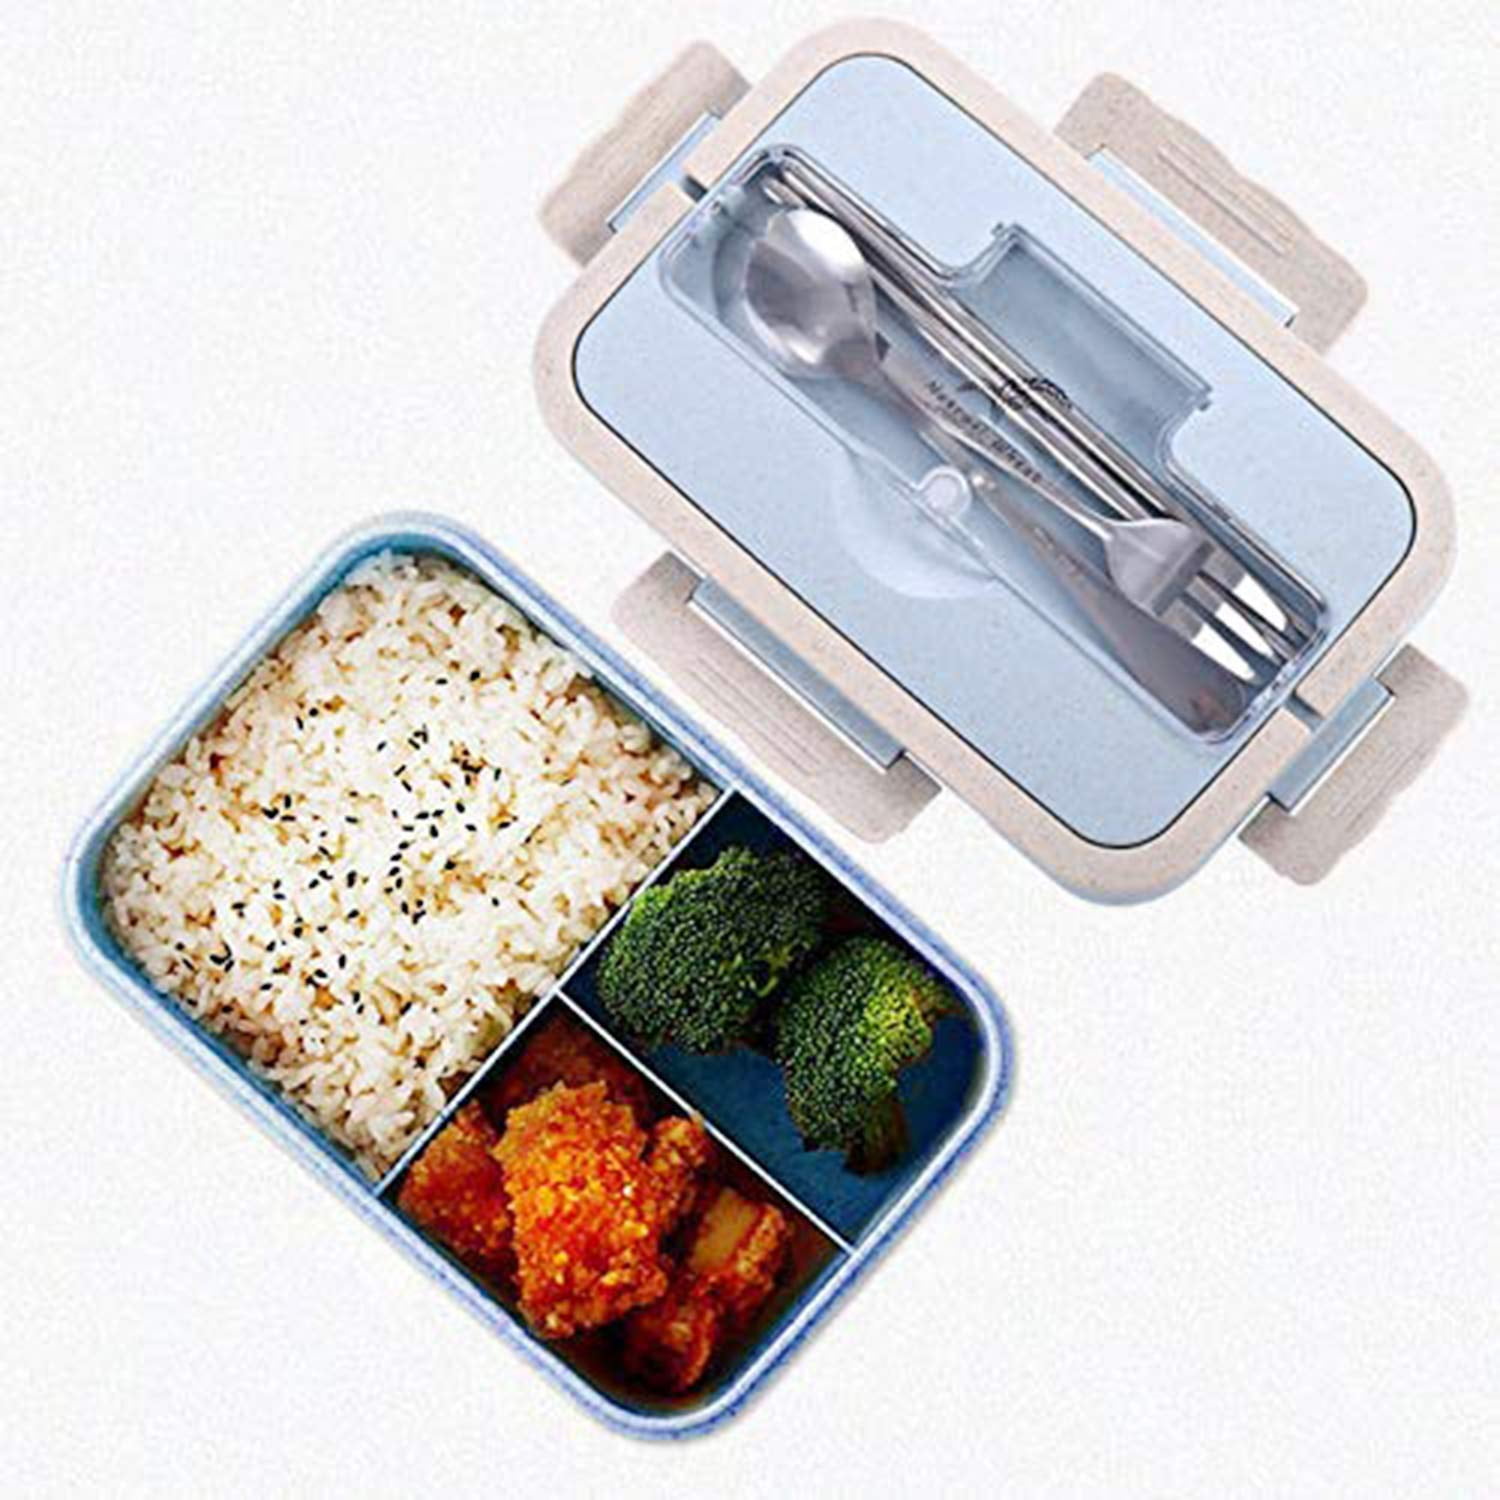 Beige Lunch Box,Natural Wheat Bento Lunch Box,BPA Free,Sandwich Box with 3 Compartments and Cutlery,Wheat Straw Lunch Box,for Kid Adult Work School,Suitable for Microwave and Dishwasher 